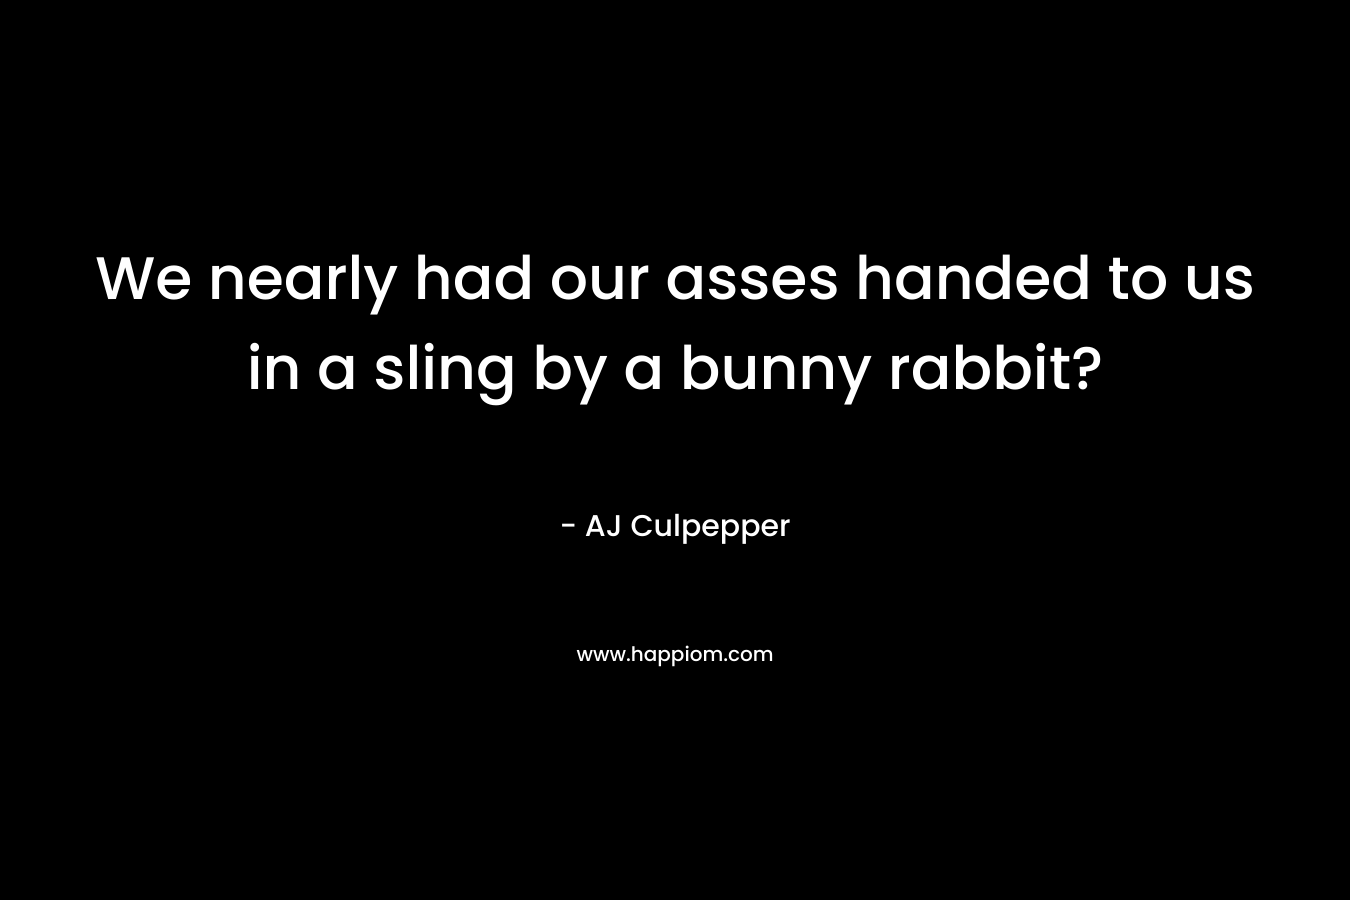 We nearly had our asses handed to us in a sling by a bunny rabbit? – AJ Culpepper